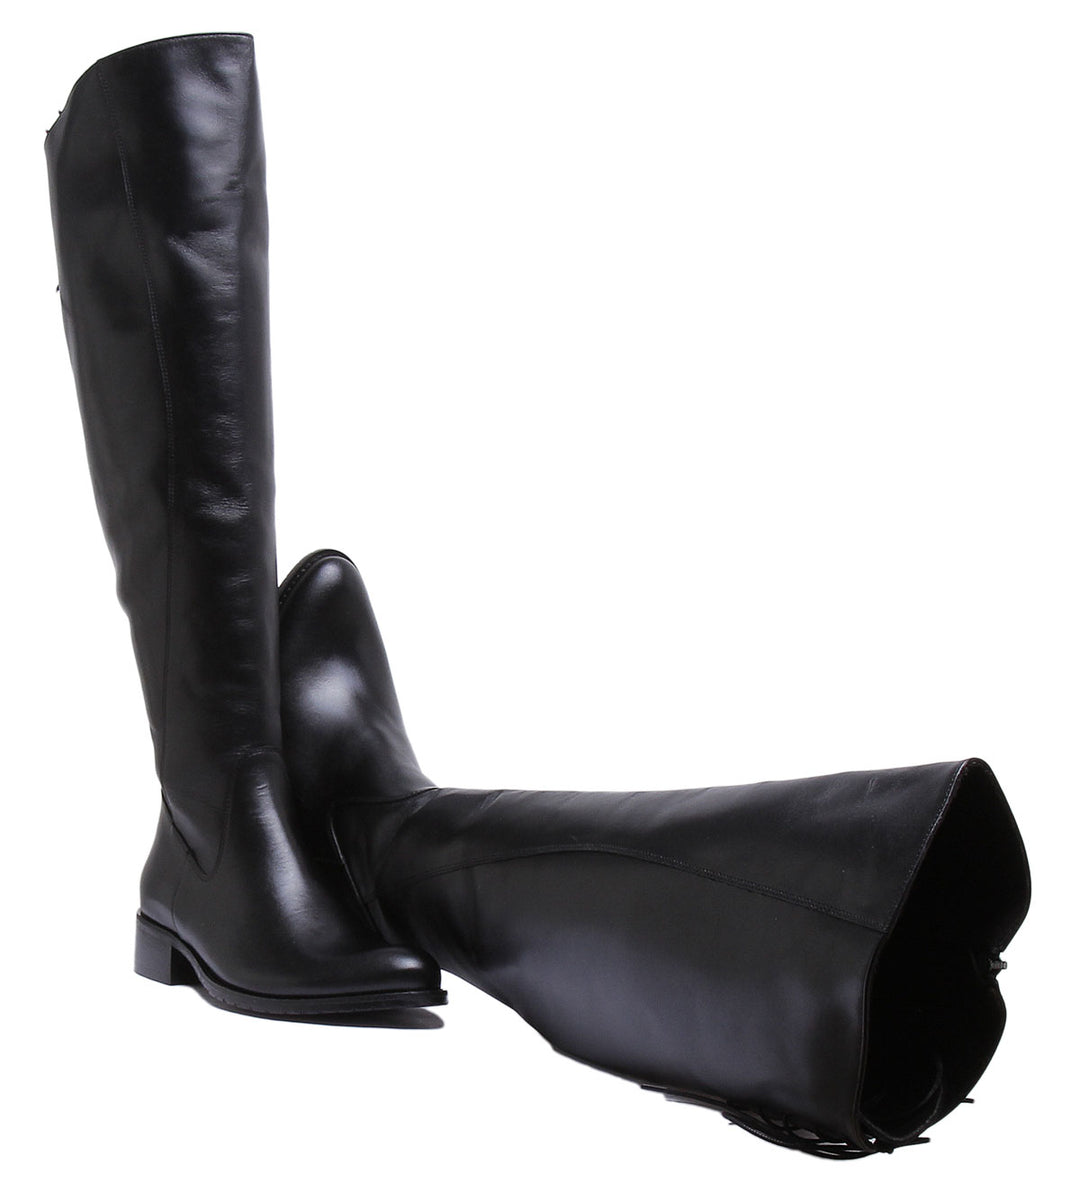 JUSTINREESS ENGLAND Womens Knee High Boot Zara Long Leather Riding Boot In Black